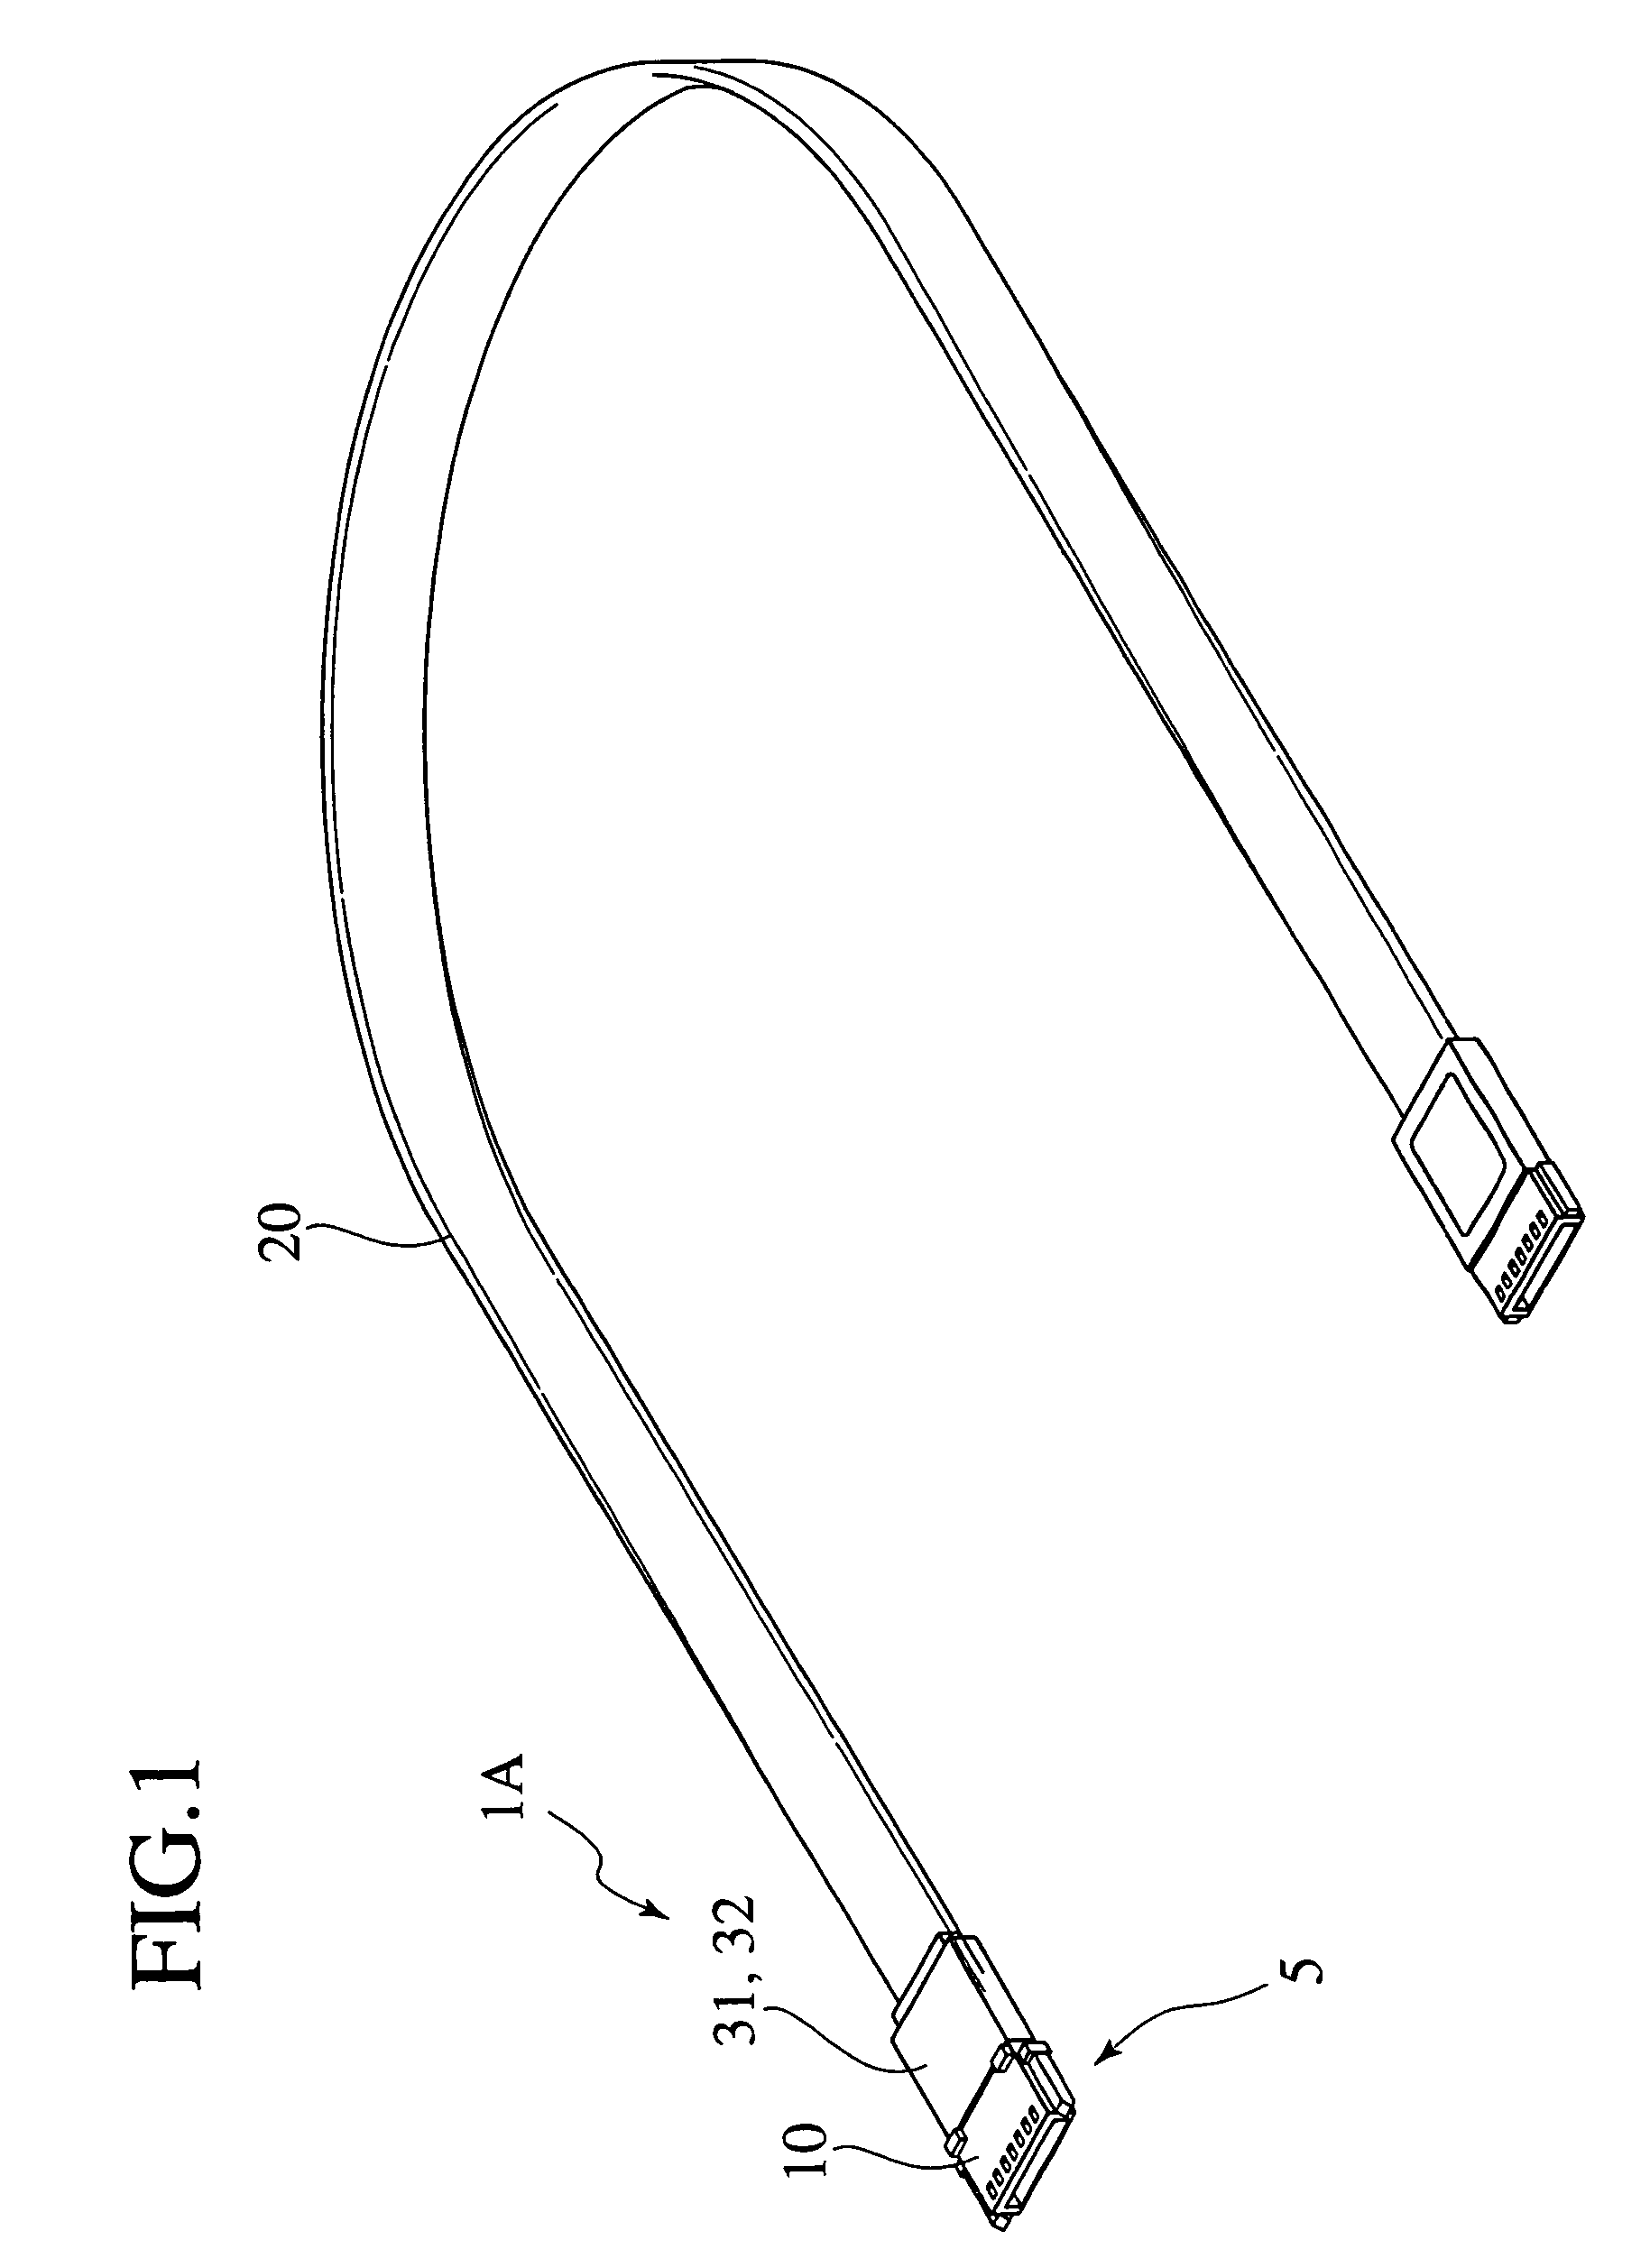 Electric connector and cable